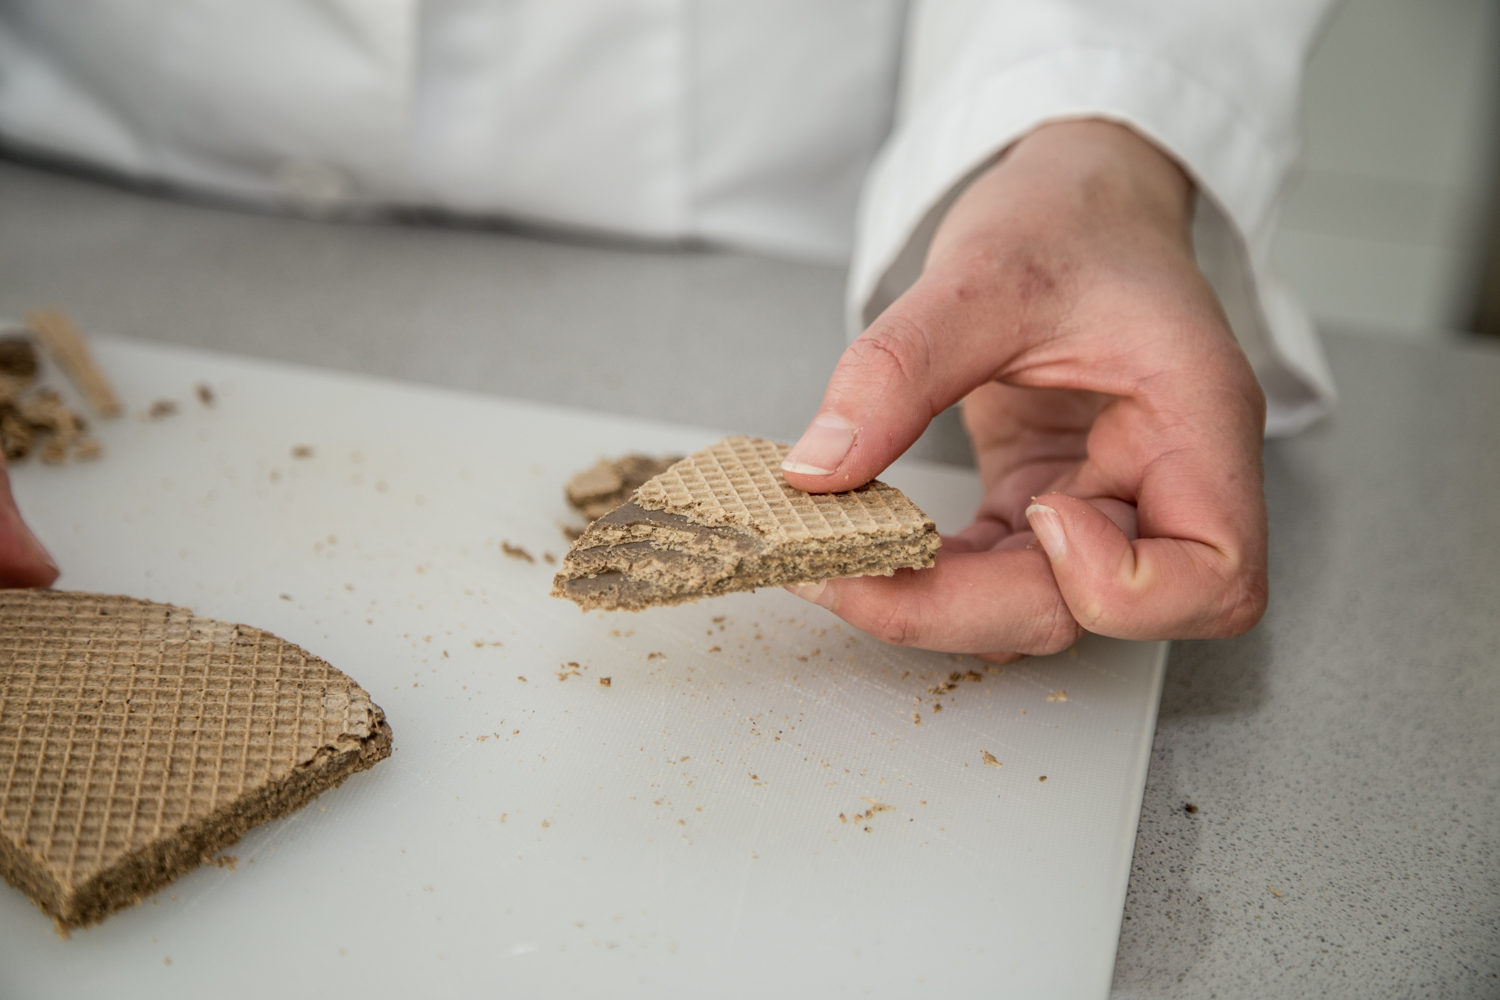 The benefits of insects are being explored across the food chain. Here: insect flour waffles from a previous project. (© FH JOANNEUM / Manfred Terler)